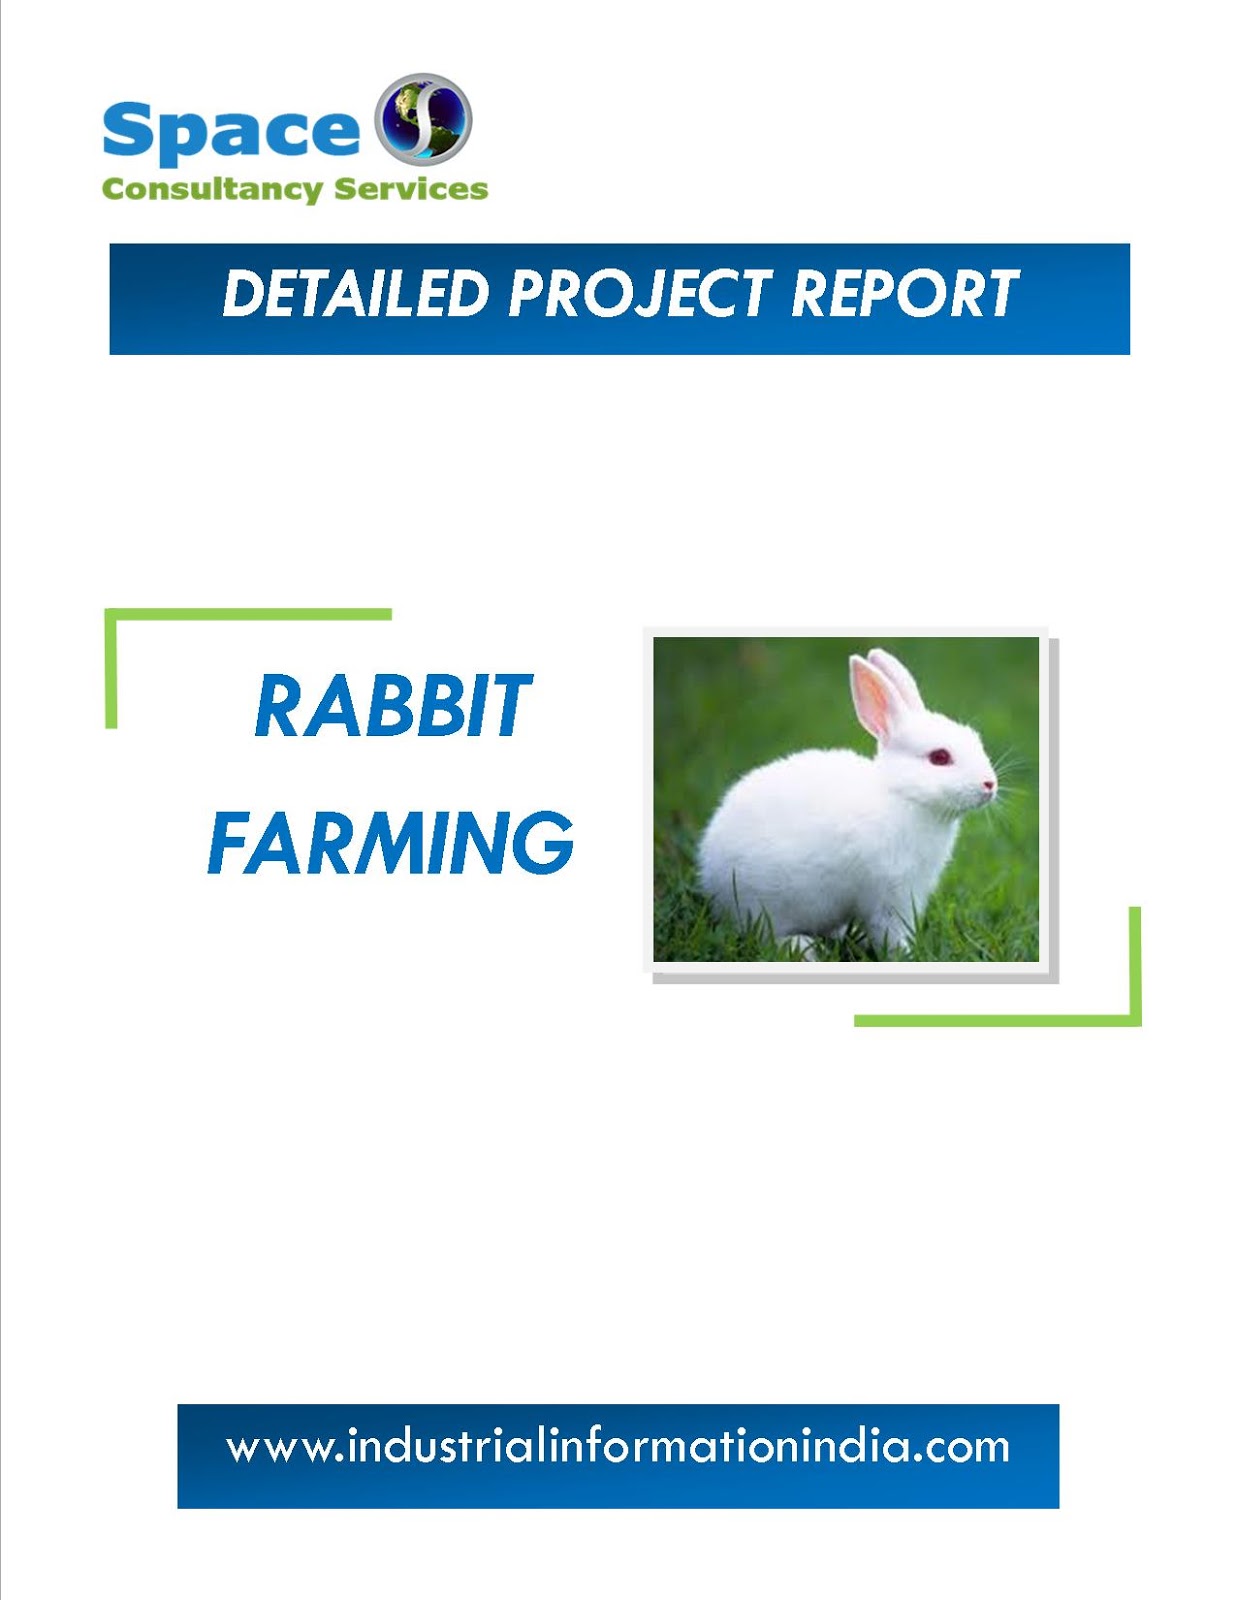 business plan for rabbit farming project